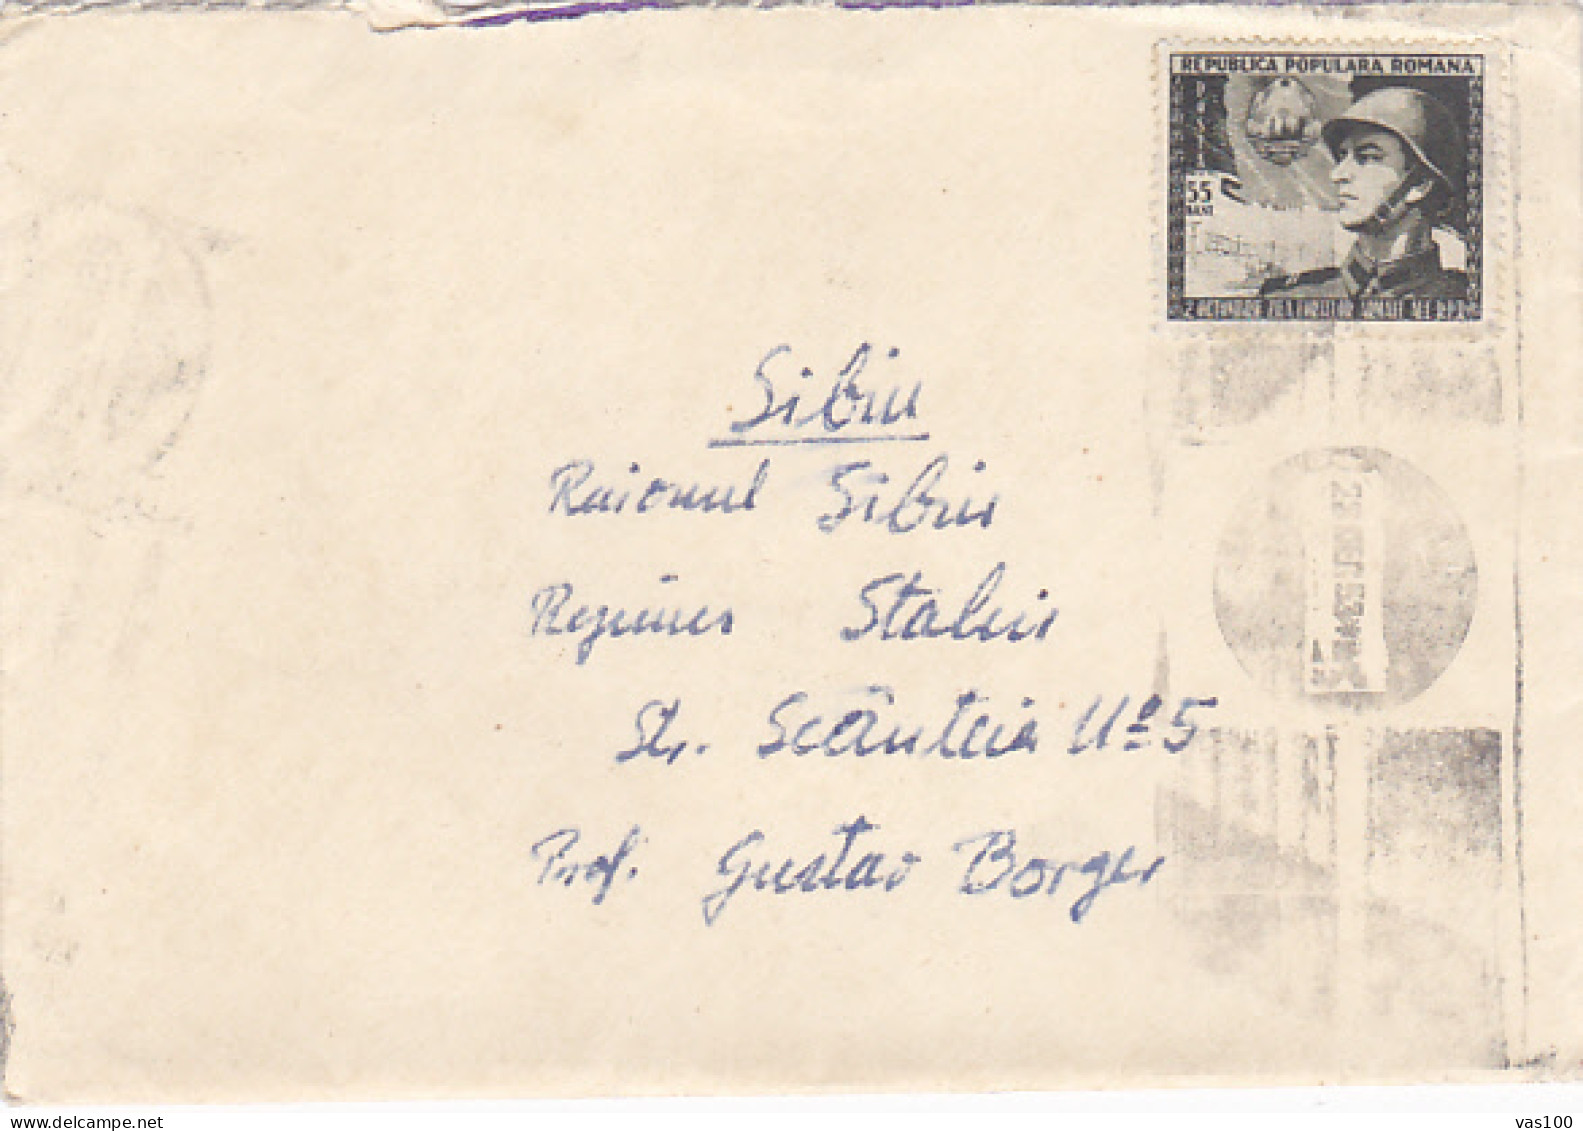 ARMY DAY, SOLDIER, STAMP ON COVER, 1953, ROMANIA - Storia Postale